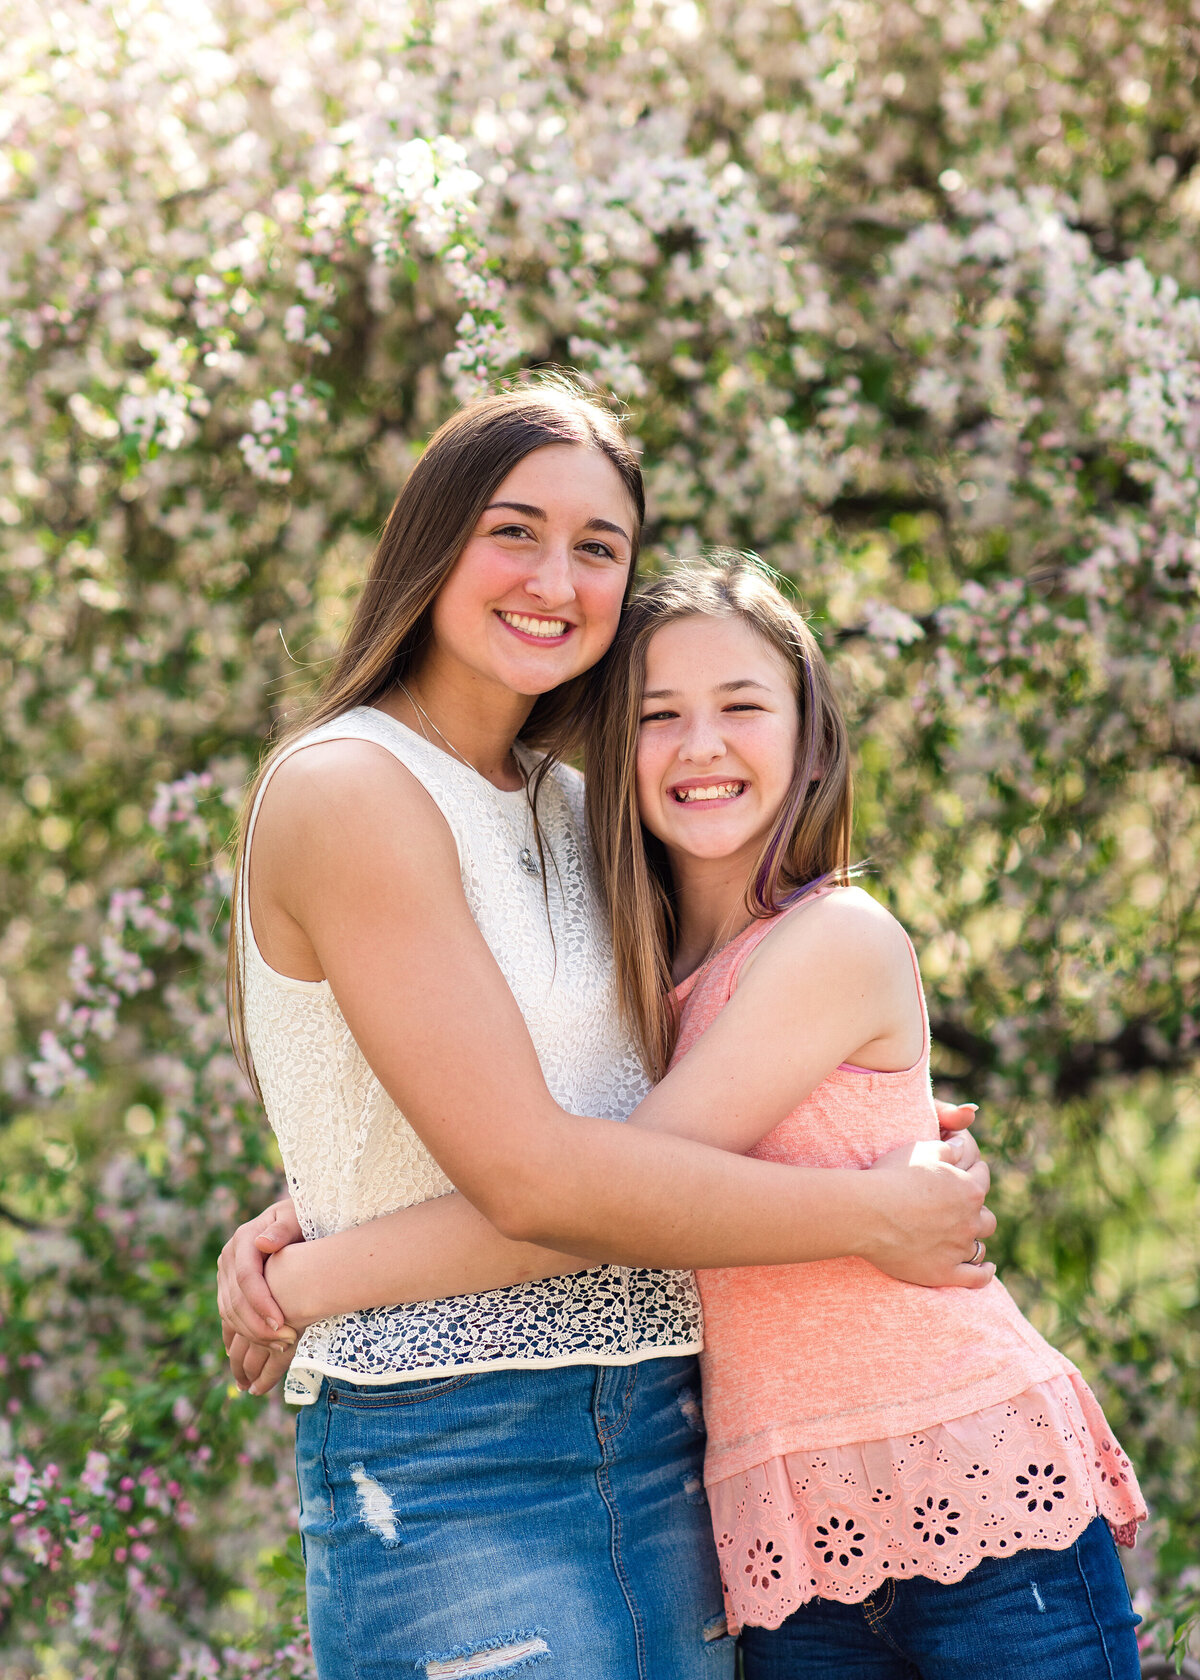 Des-Moines-Iowa-Family-Photographer-Theresa-Schumacher-Photography-Spring-Sisters-Flowers